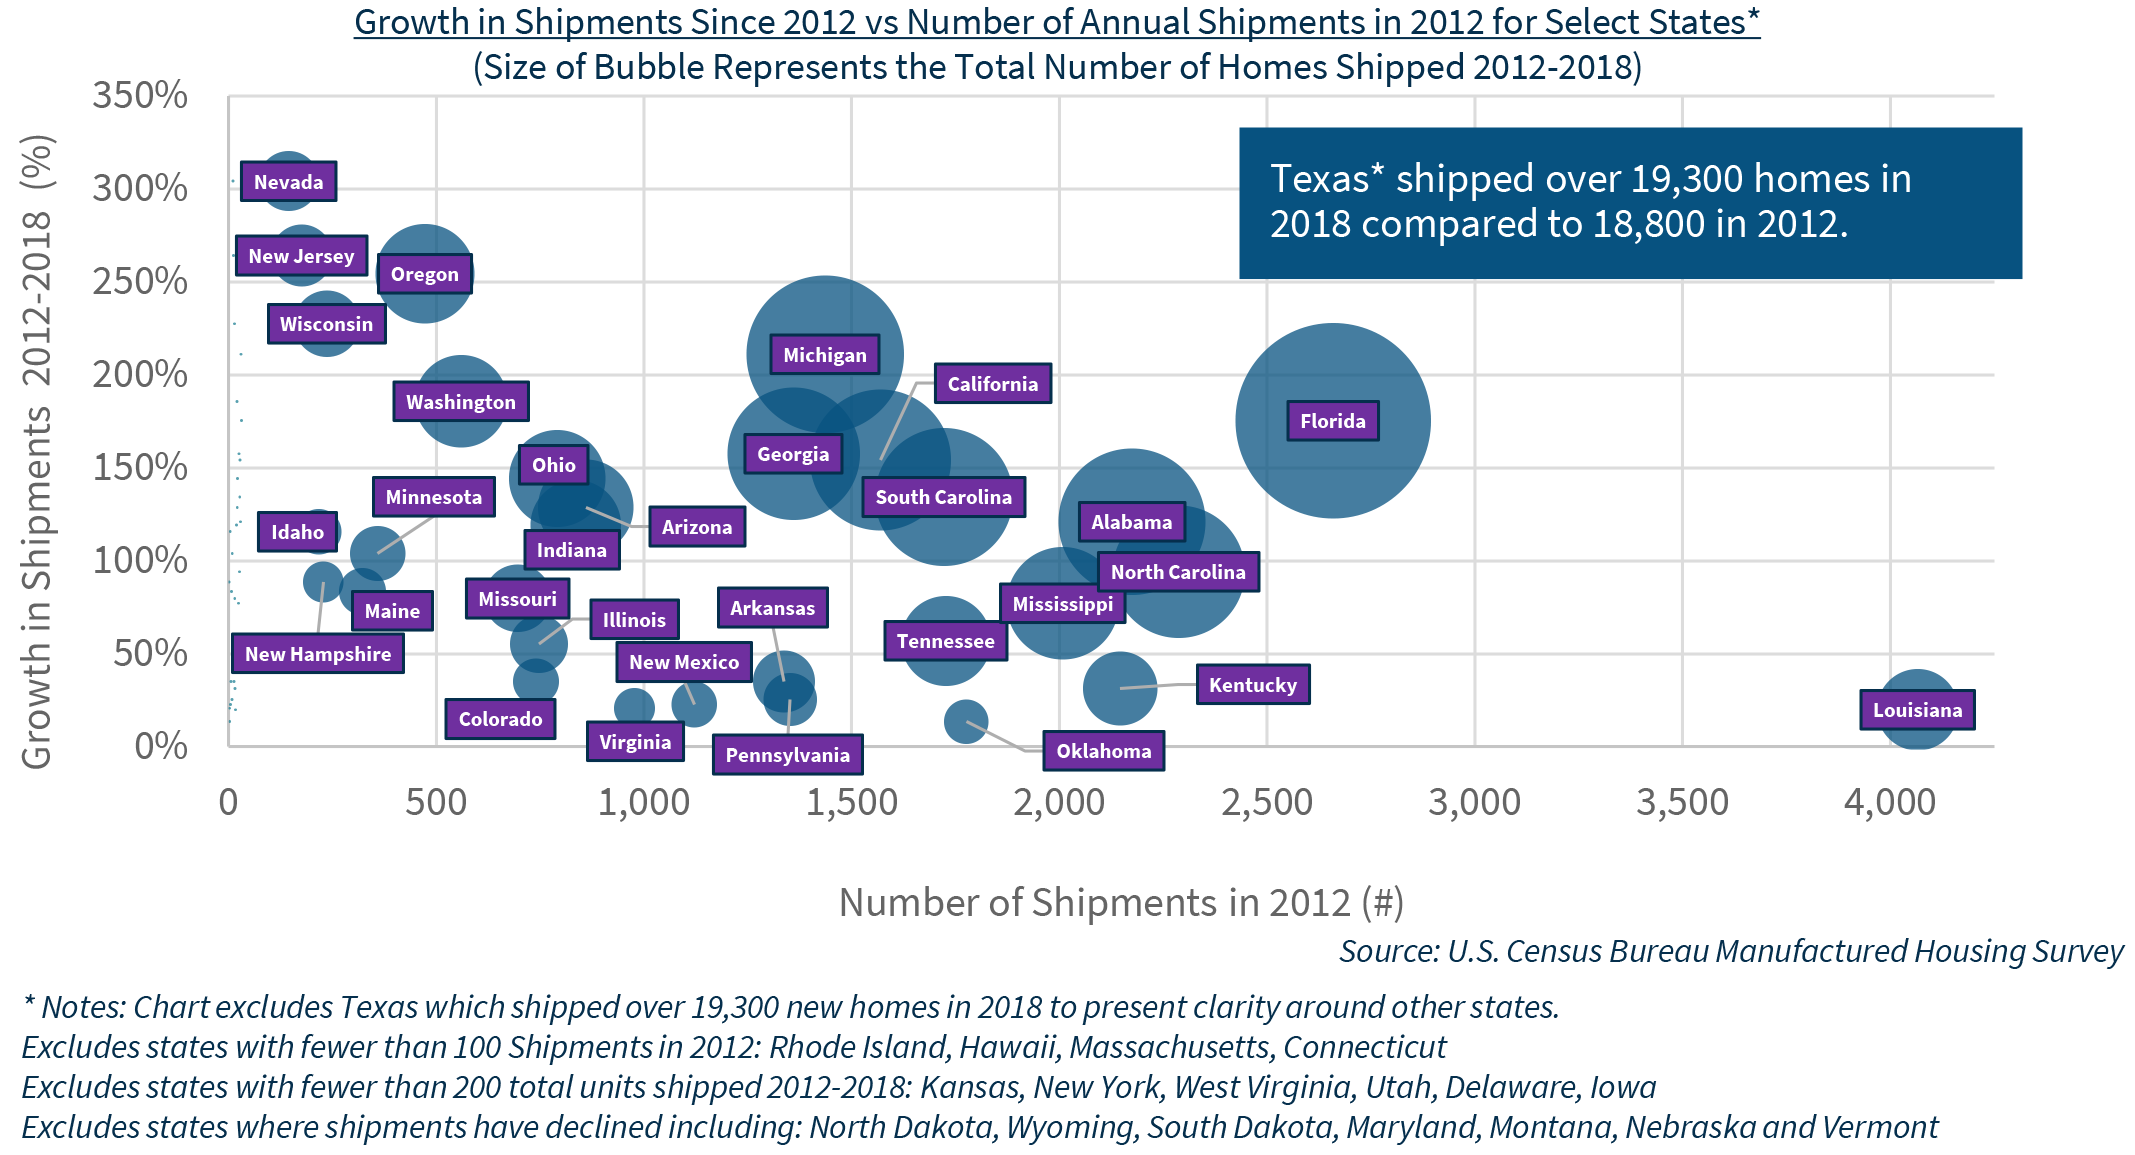 Growth in Shipments Since 2012 vs Number of Annual Shipments in 2012 for Select States